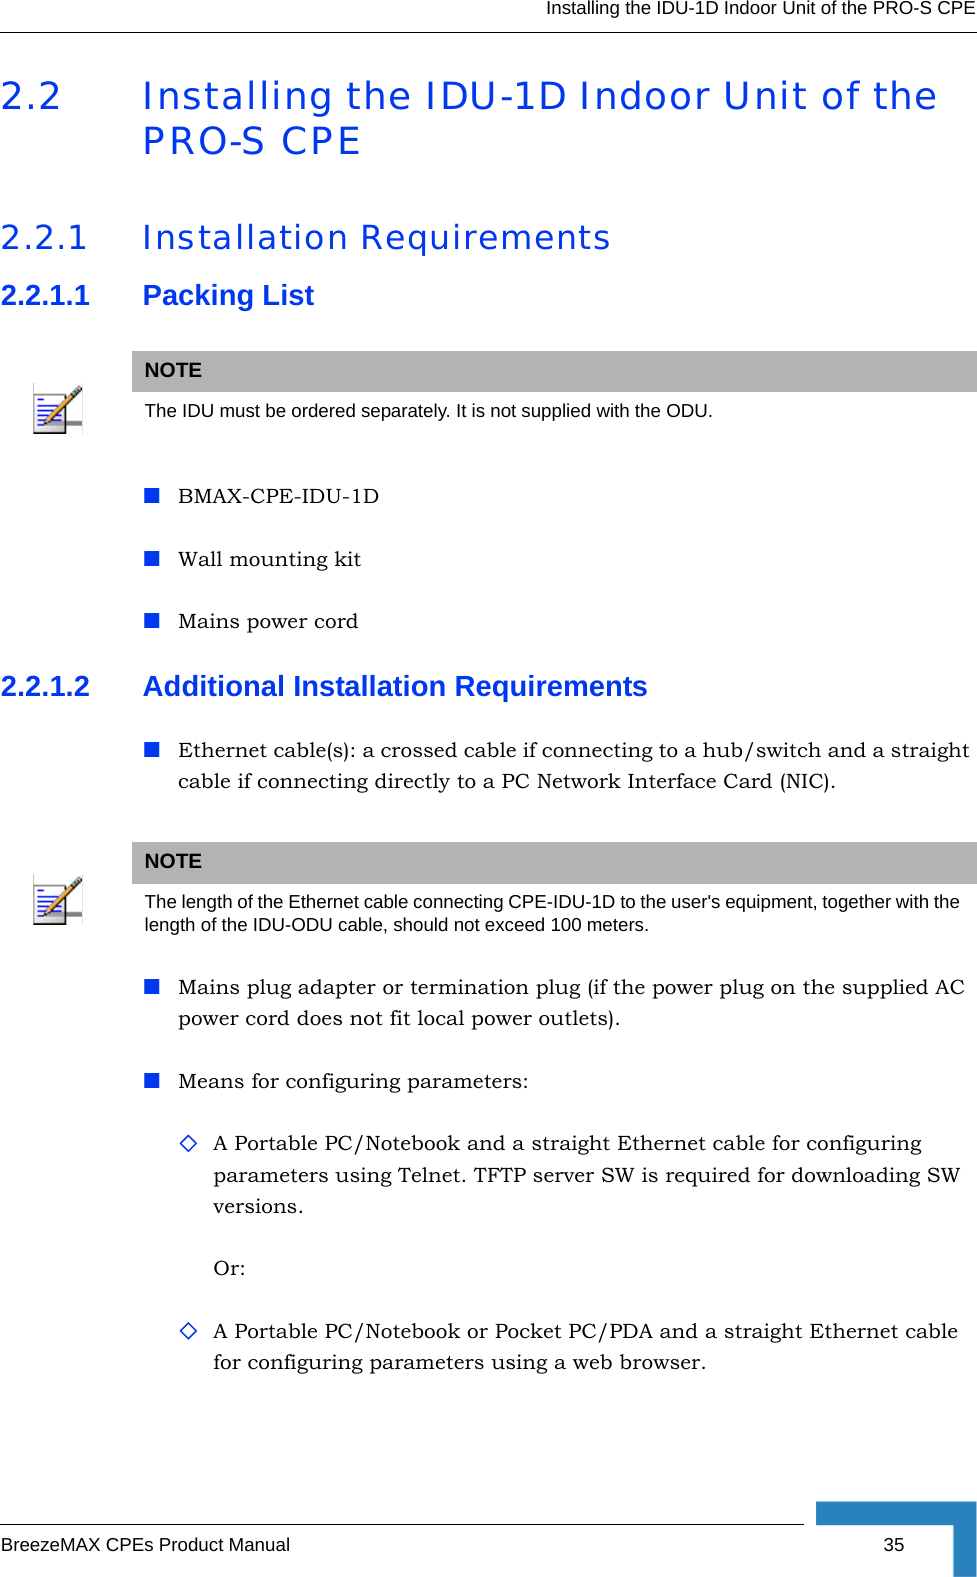 Installing the IDU-1D Indoor Unit of the PRO-S CPEBreezeMAX CPEs Product Manual 352.2 Installing the IDU-1D Indoor Unit of the PRO-S CPE2.2.1 Installation Requirements2.2.1.1 Packing ListBMAX-CPE-IDU-1D Wall mounting kit Mains power cord2.2.1.2 Additional Installation RequirementsEthernet cable(s): a crossed cable if connecting to a hub/switch and a straight cable if connecting directly to a PC Network Interface Card (NIC).Mains plug adapter or termination plug (if the power plug on the supplied AC power cord does not fit local power outlets).Means for configuring parameters: A Portable PC/Notebook and a straight Ethernet cable for configuring parameters using Telnet. TFTP server SW is required for downloading SW versions.Or:A Portable PC/Notebook or Pocket PC/PDA and a straight Ethernet cable for configuring parameters using a web browser. NOTEThe IDU must be ordered separately. It is not supplied with the ODU.NOTEThe length of the Ethernet cable connecting CPE-IDU-1D to the user&apos;s equipment, together with the length of the IDU-ODU cable, should not exceed 100 meters.